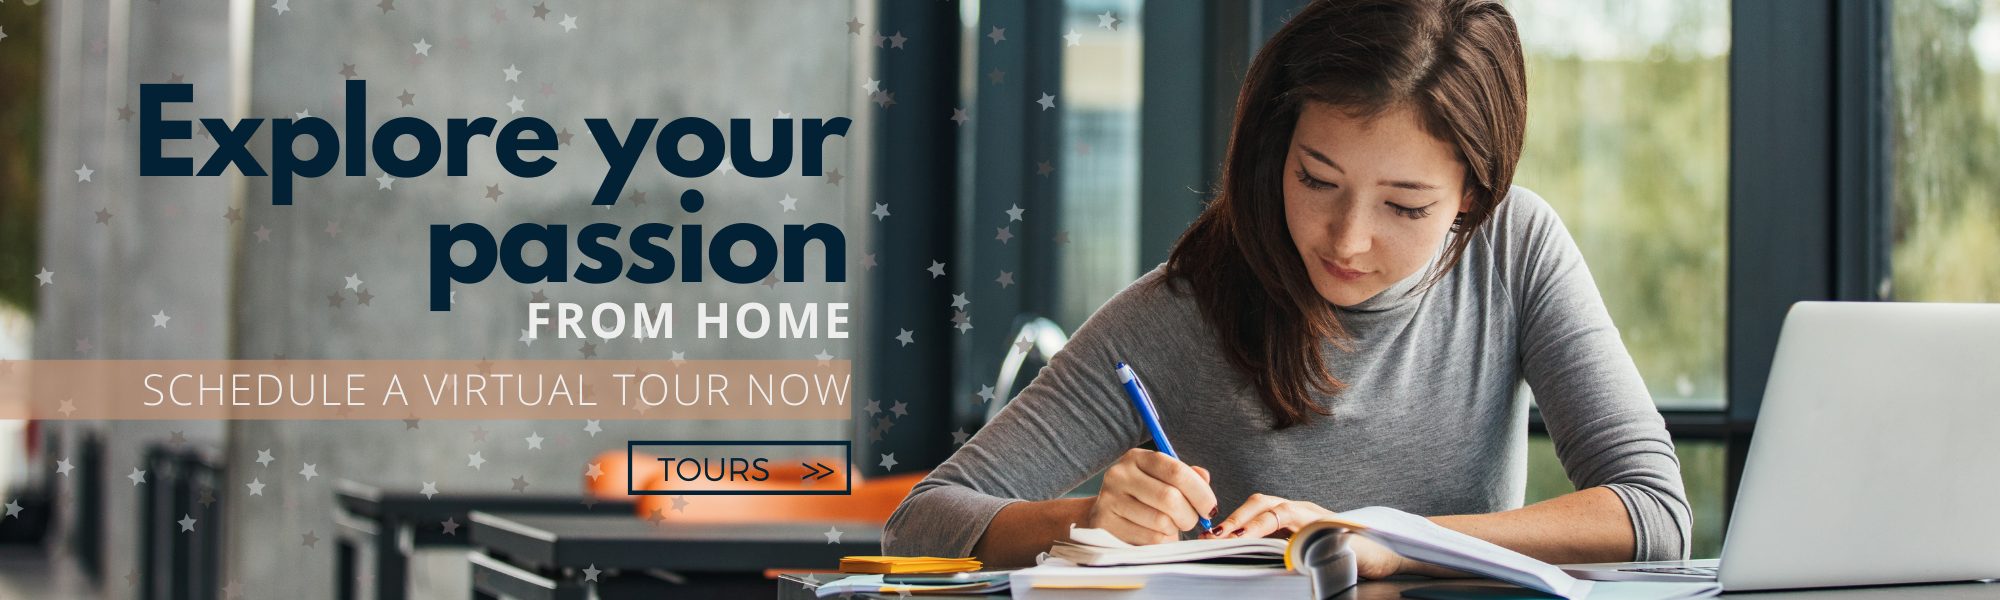 Explore your passion from home with our hybrid learning during covid 19. Take a virtual tour today with our admissions team.